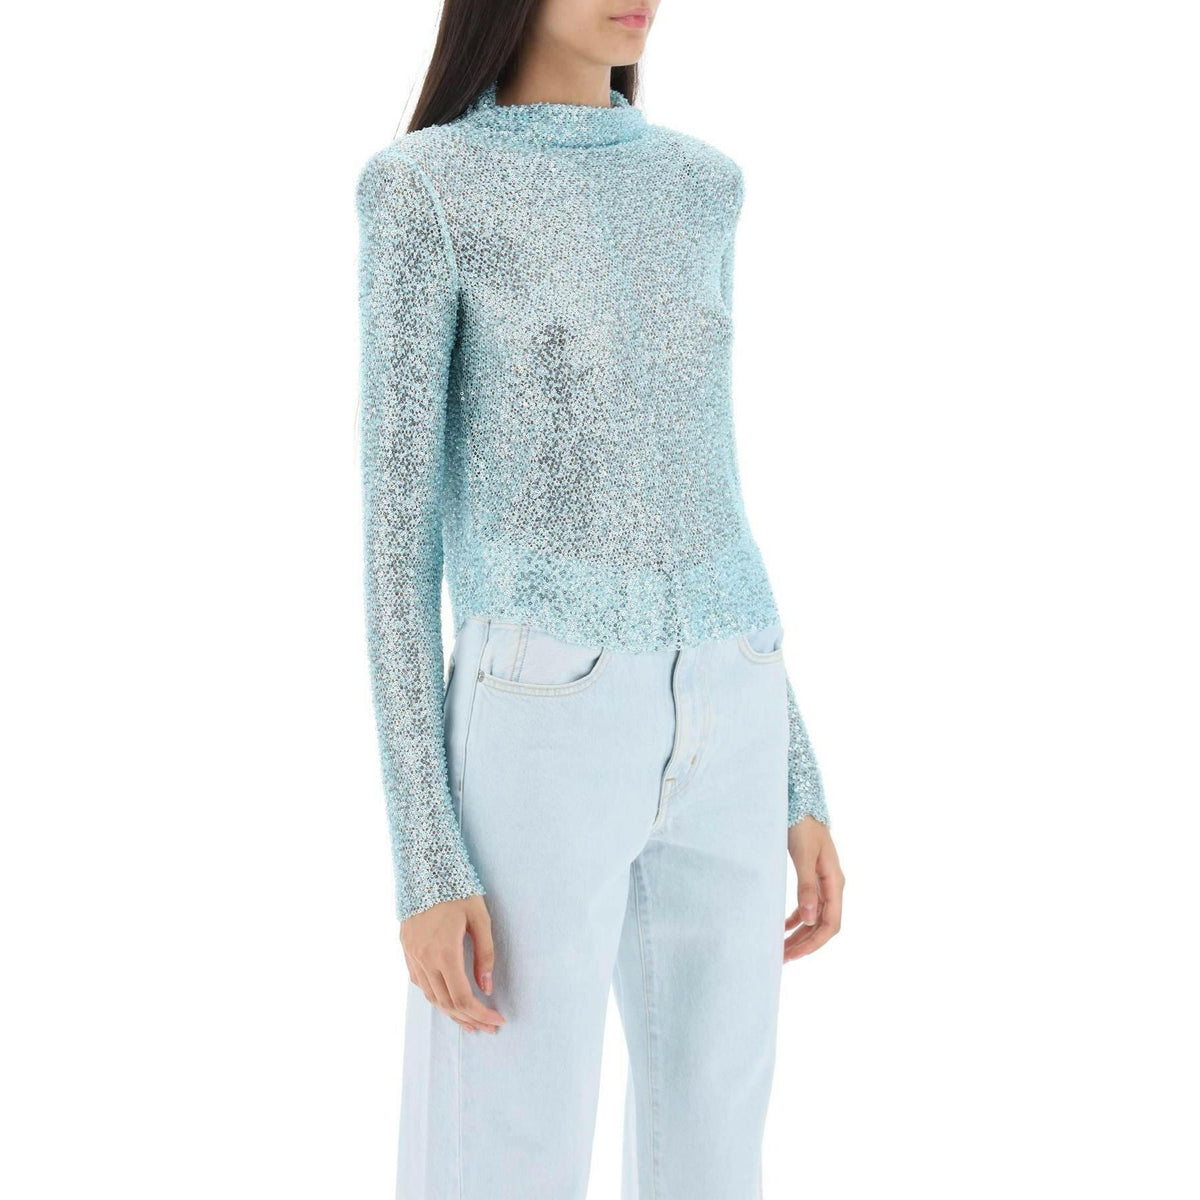 SELF PORTRAIT - Long Sleeved Top With Sequins And Beads - JOHN JULIA